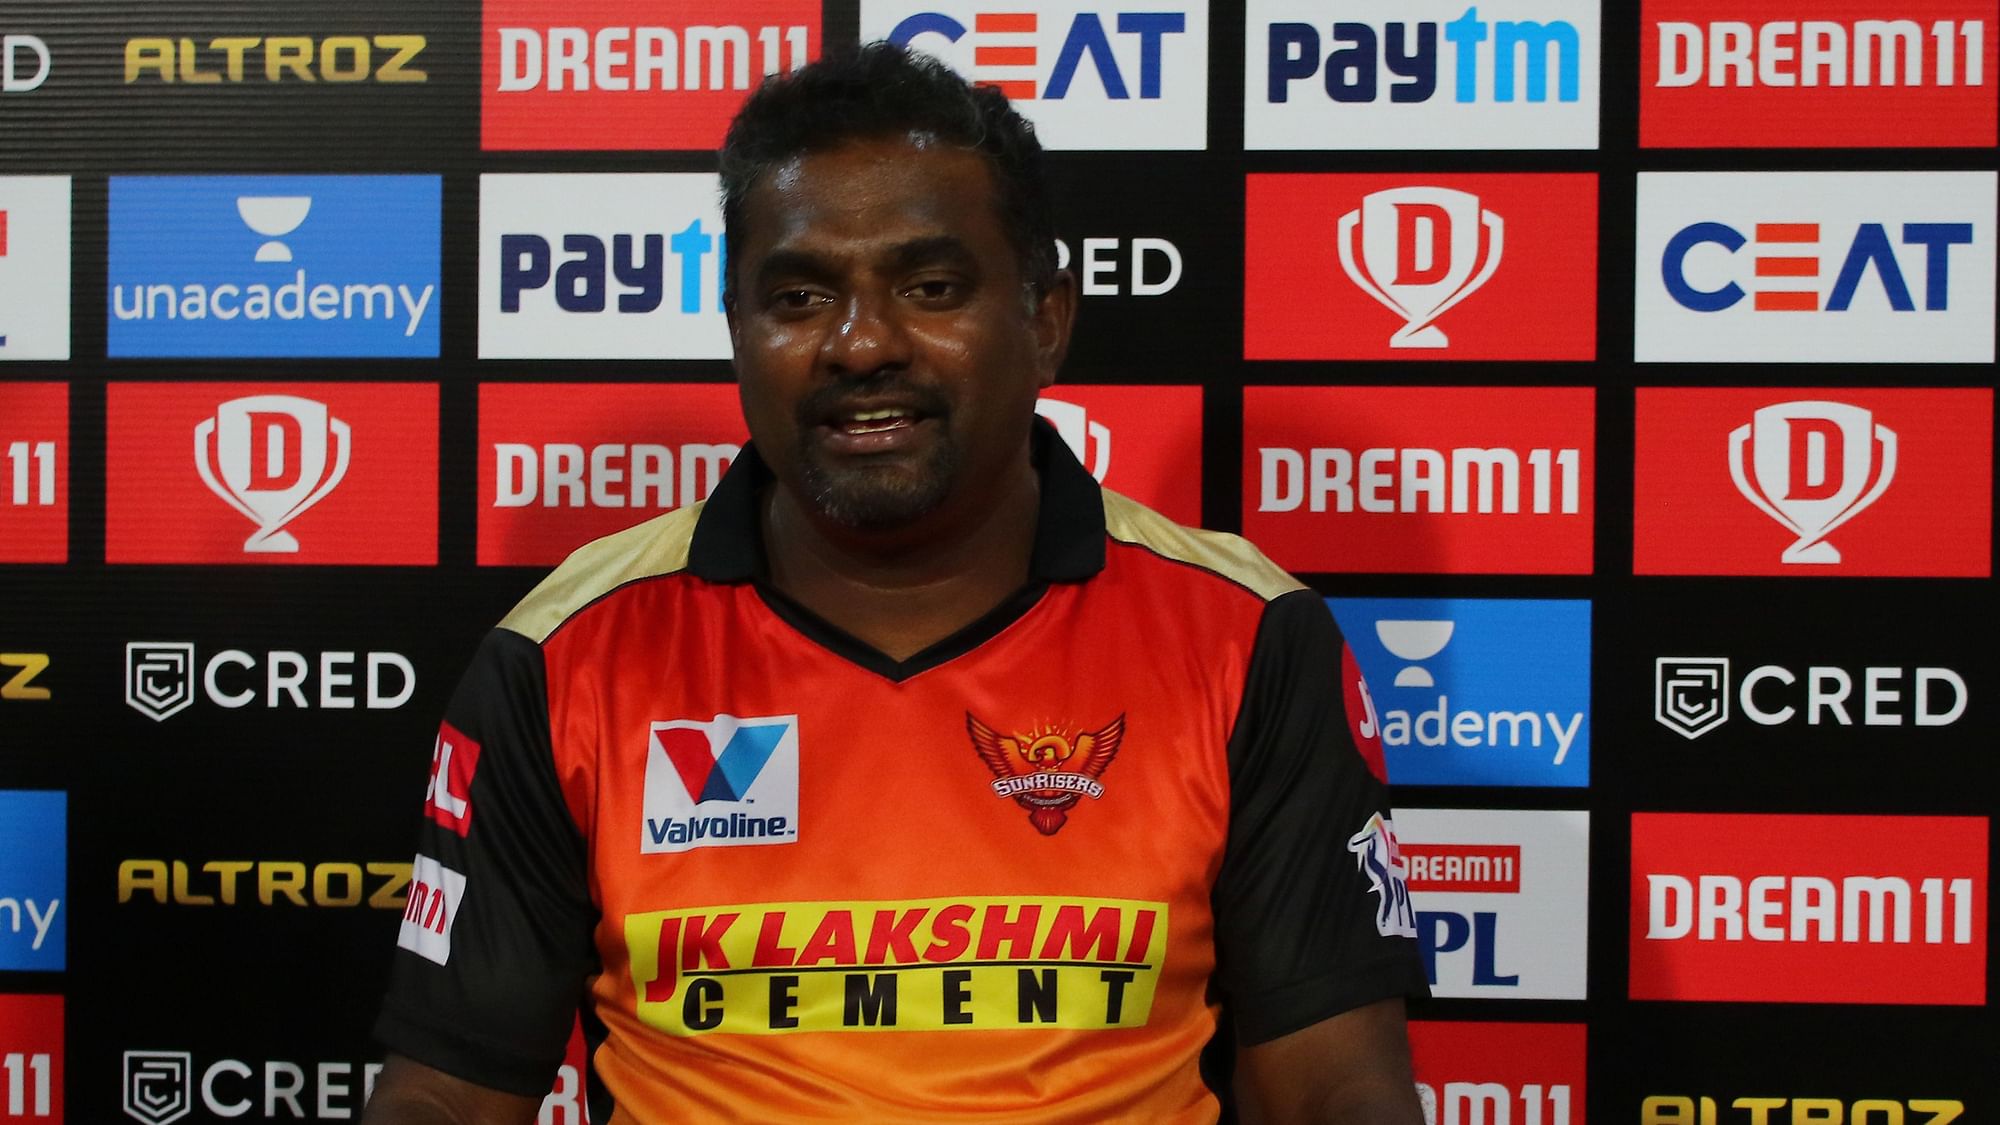 Muttiah Muralitharan during a press conference in IPL 2020